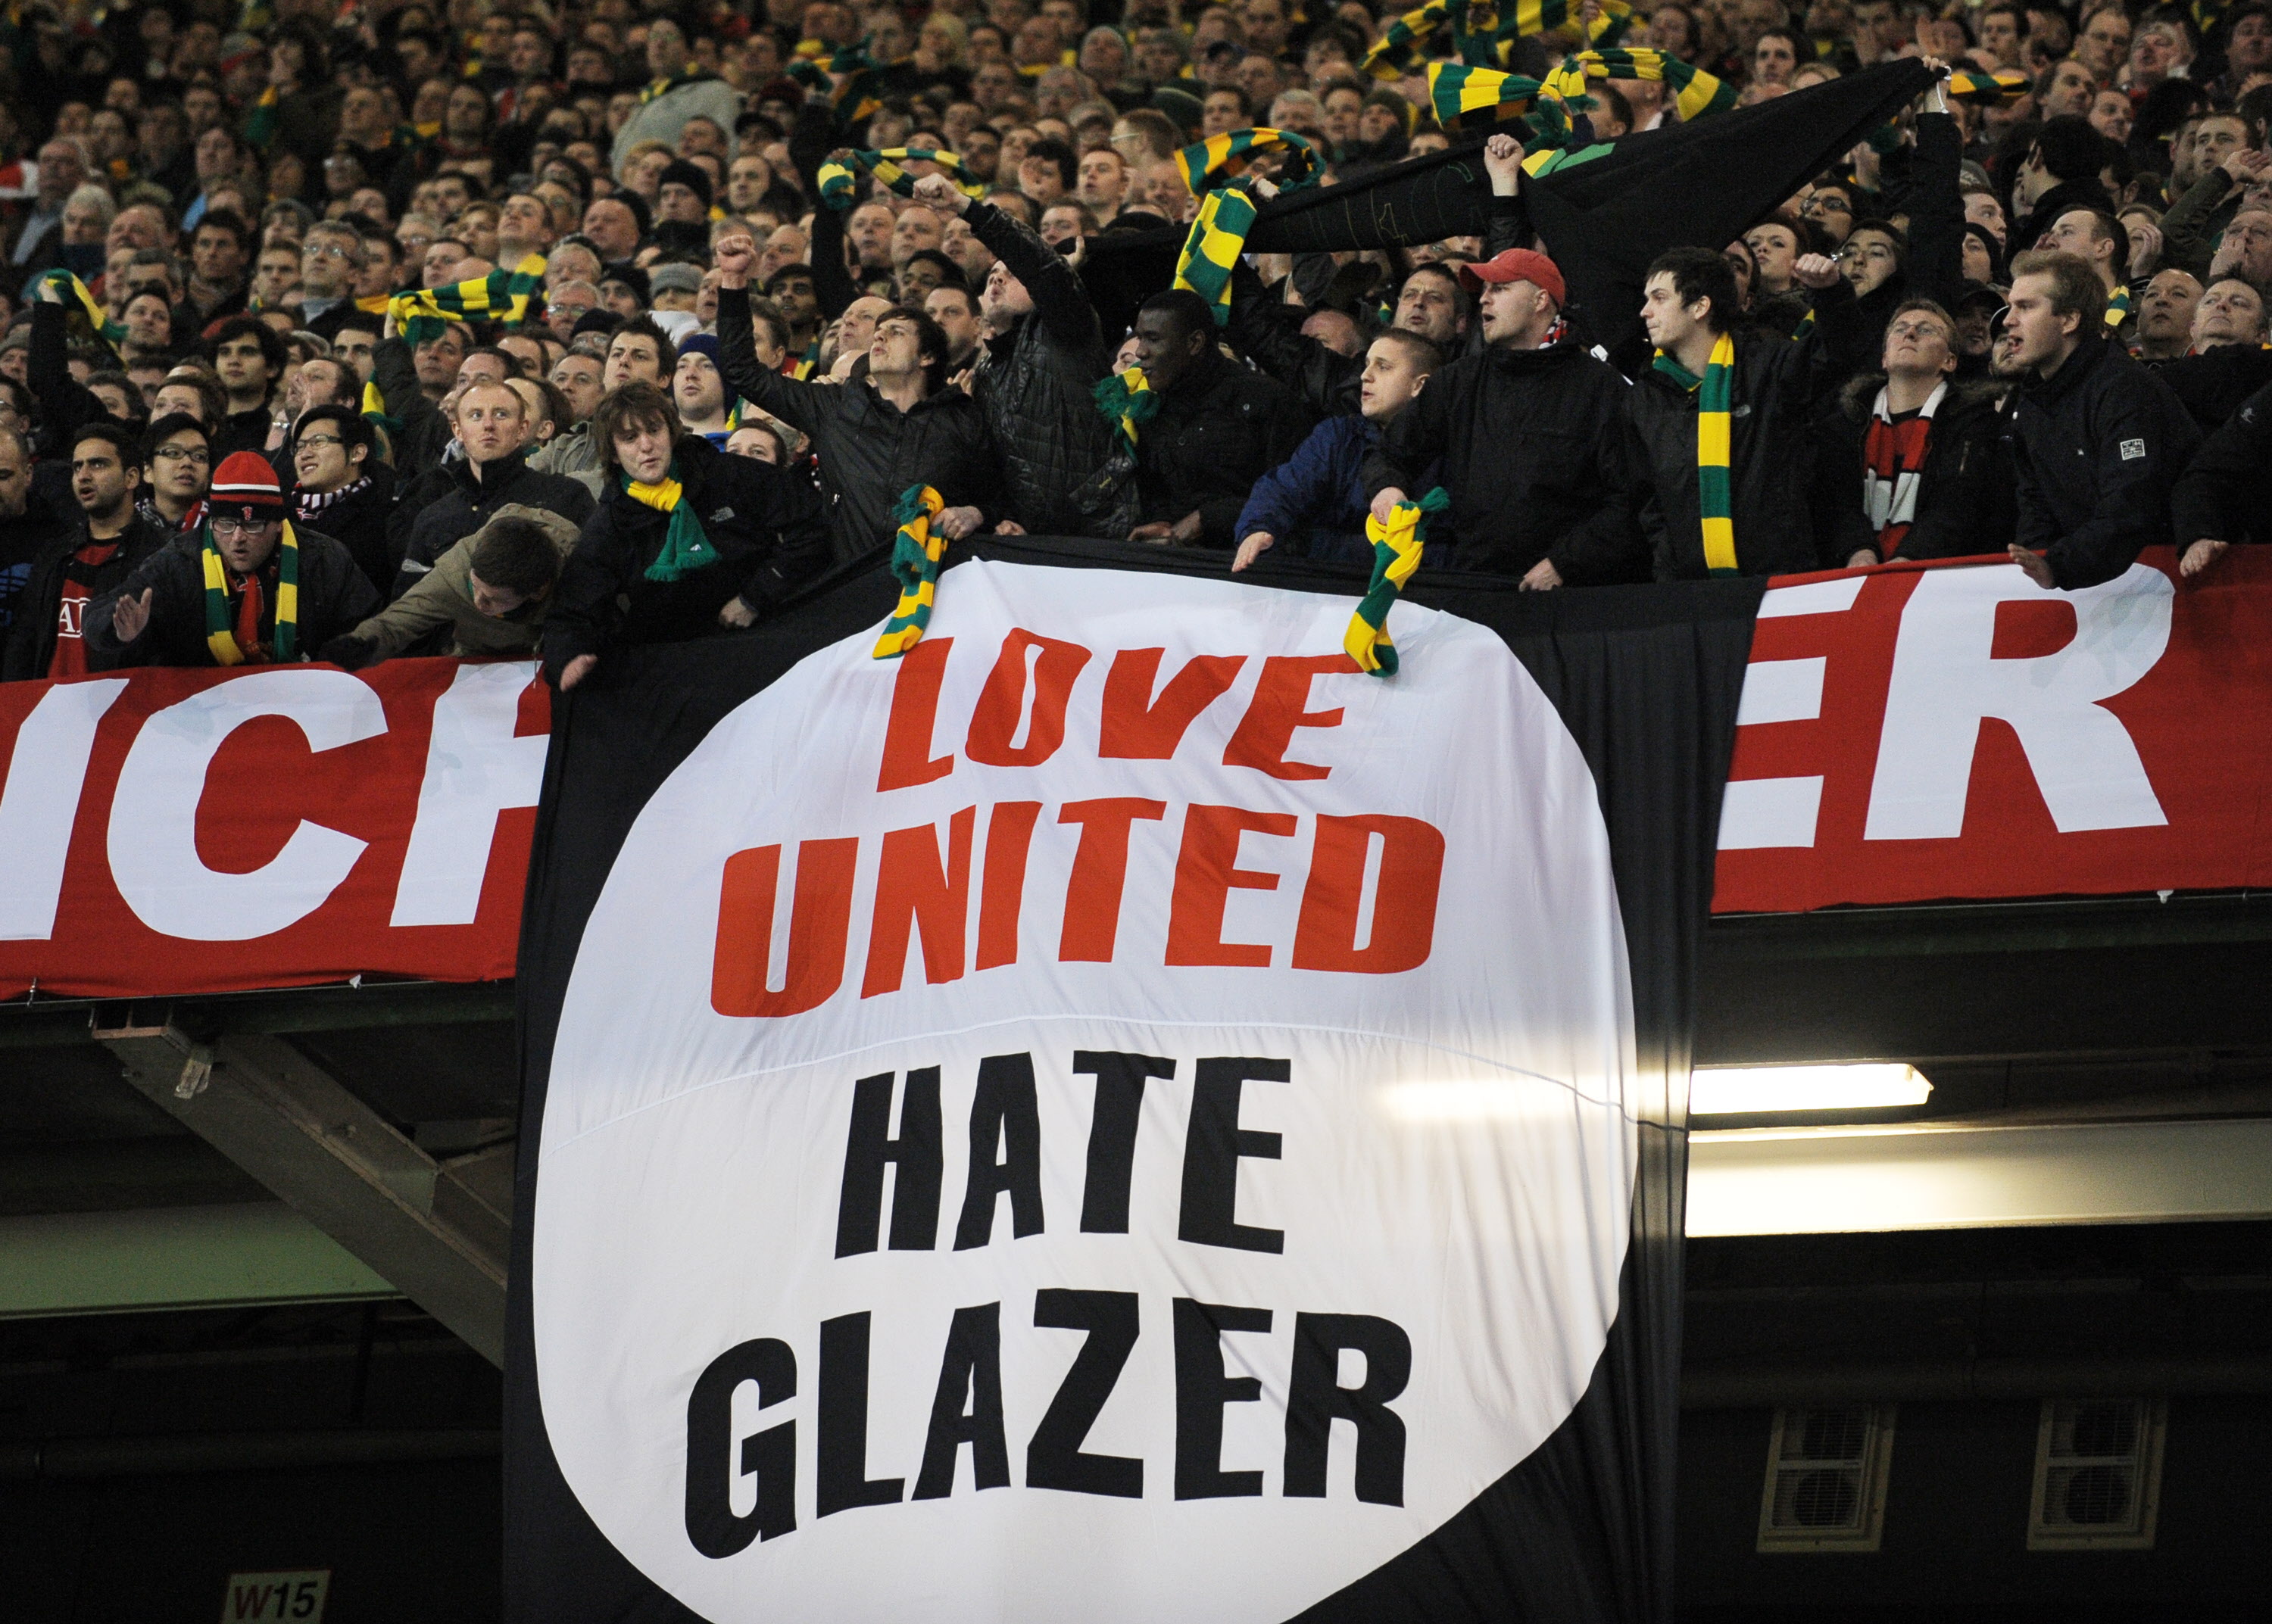 Manchester United supporters hold an anti-Glazer family banner during their UEFA Champions League round of 16, second leg football match against AC Milan at Old Trafford in Manchester, north-west England, on March 10, 2010. Manchester won 4-0.  AFP PHOTO/ANDREW YATES (Photo credit should read ANDREW YATES/AFP/Getty Images)